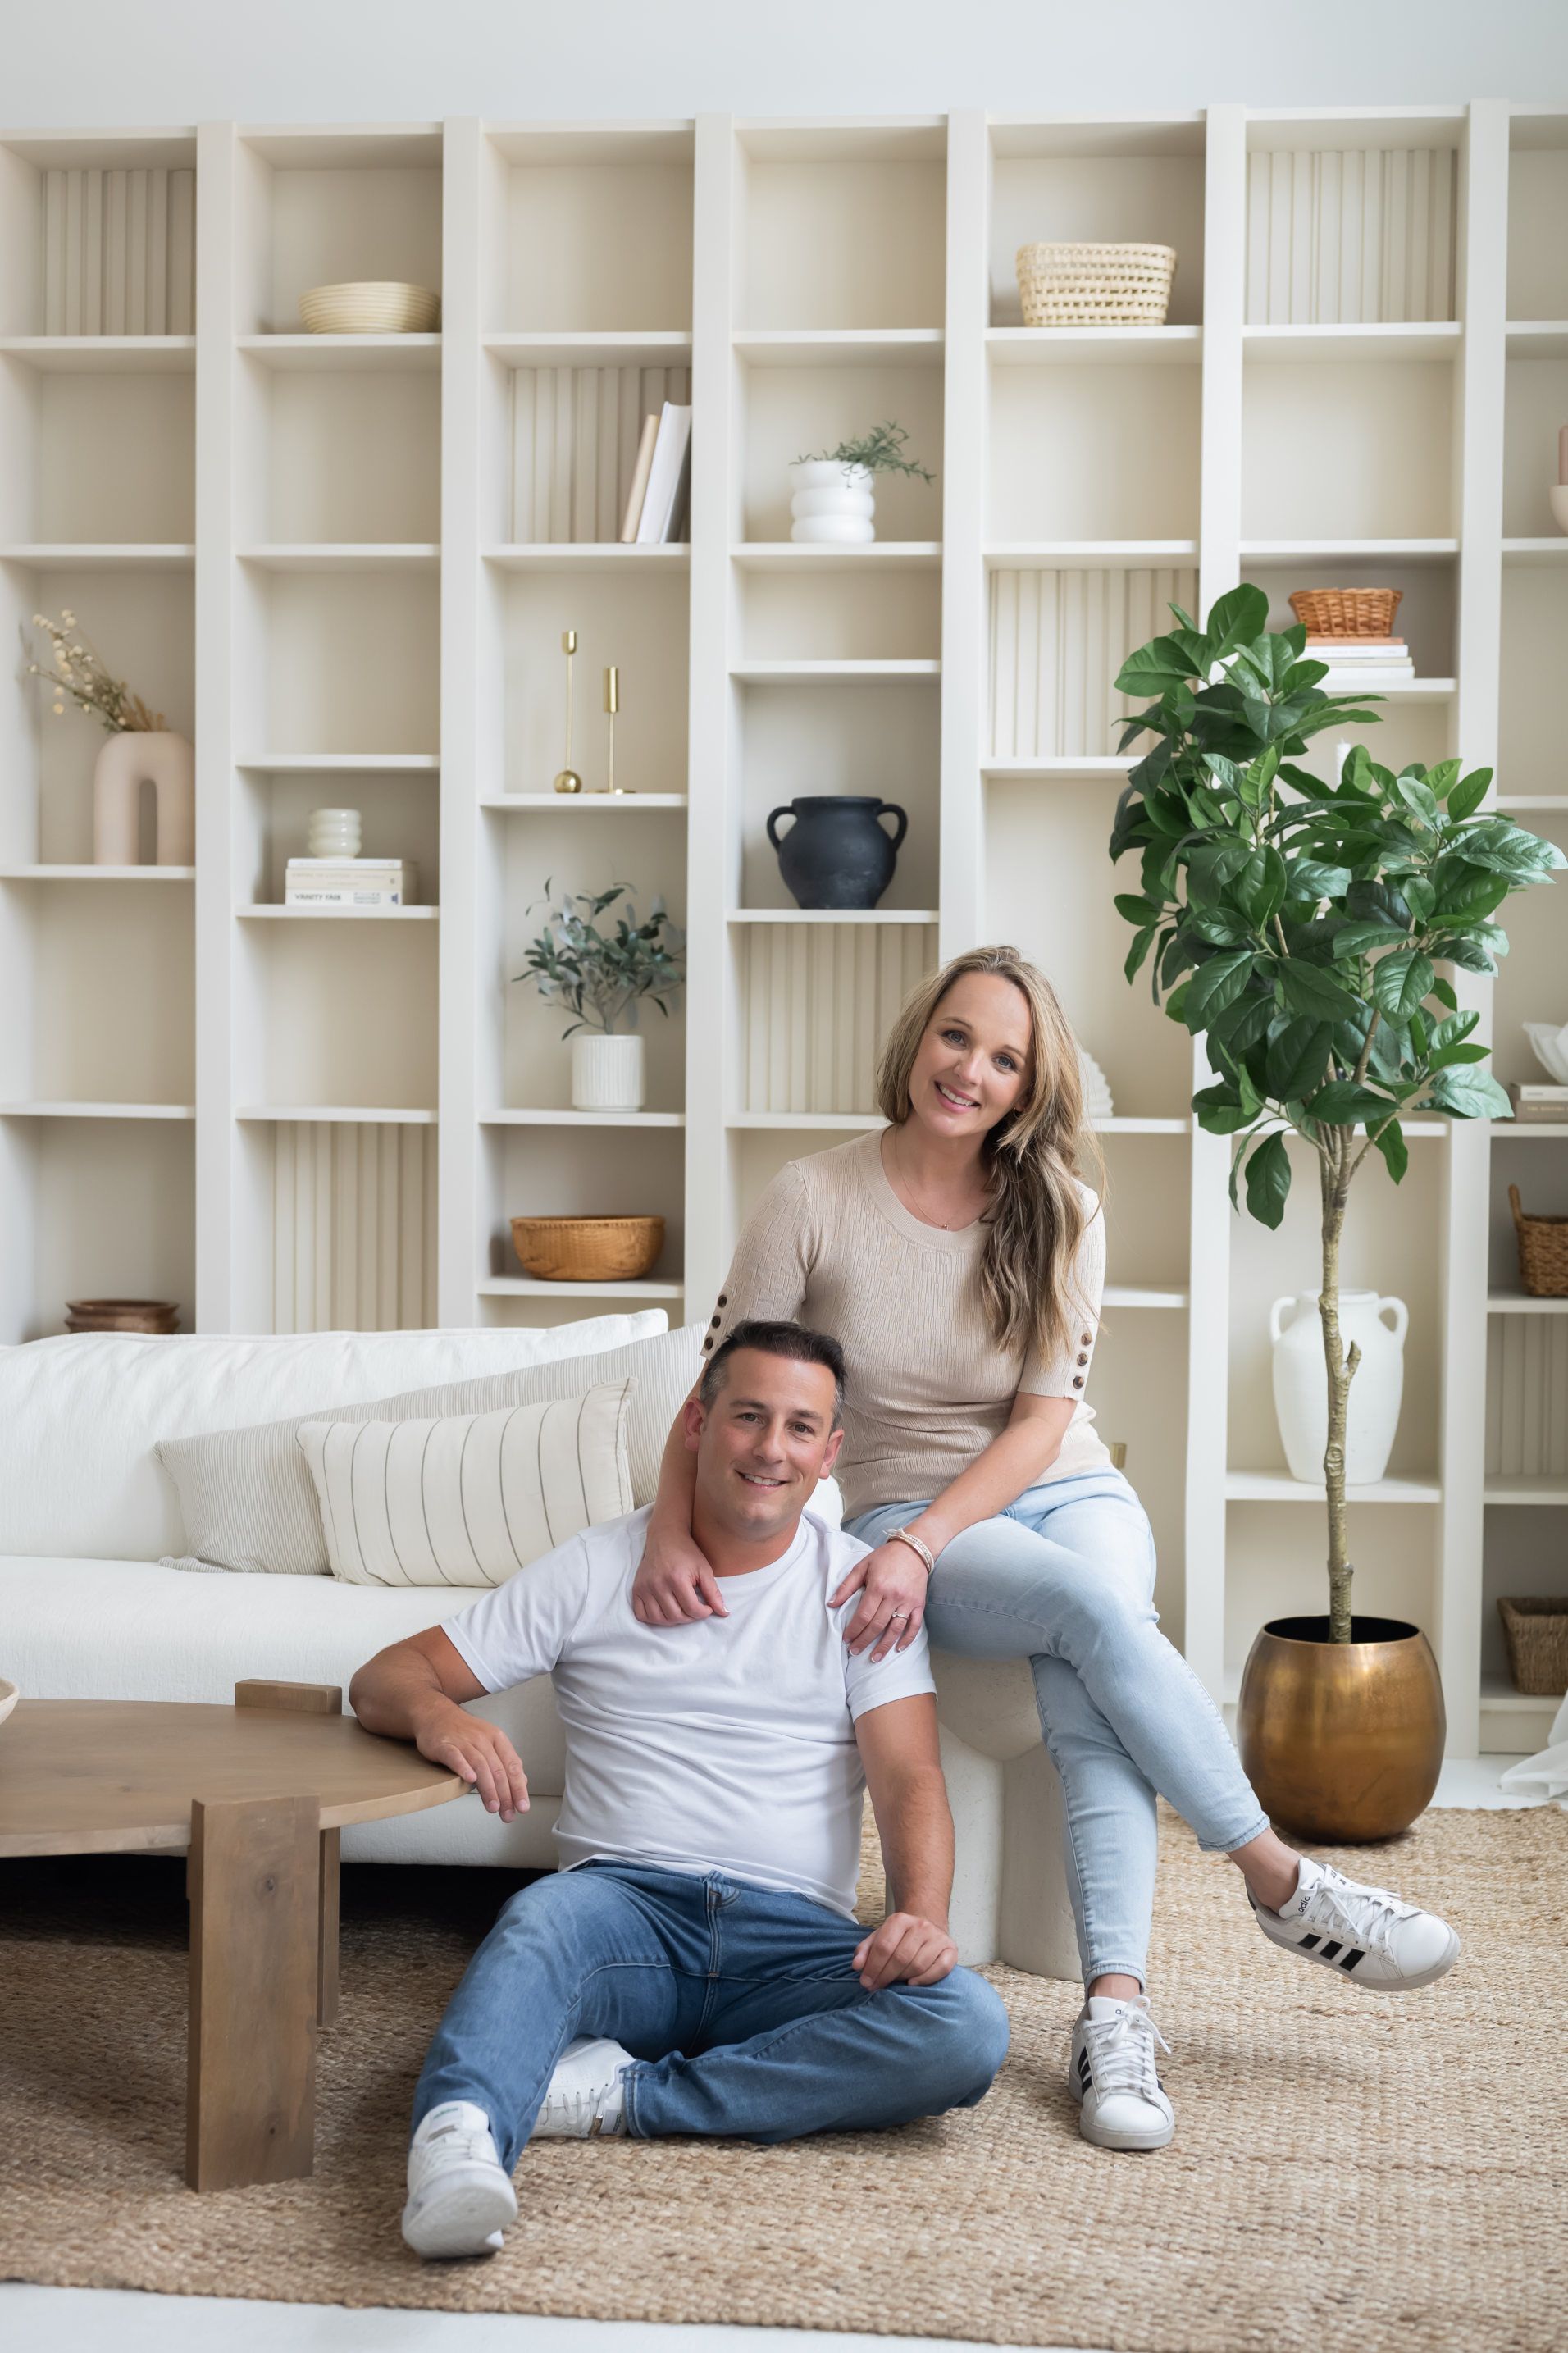 A smiling couple in casual attire sits comfortably in a living room, exuding a relaxed yet stylish vibe, with a neatly arranged bookshelf and lush greenery enhancing the homely atmosphere.